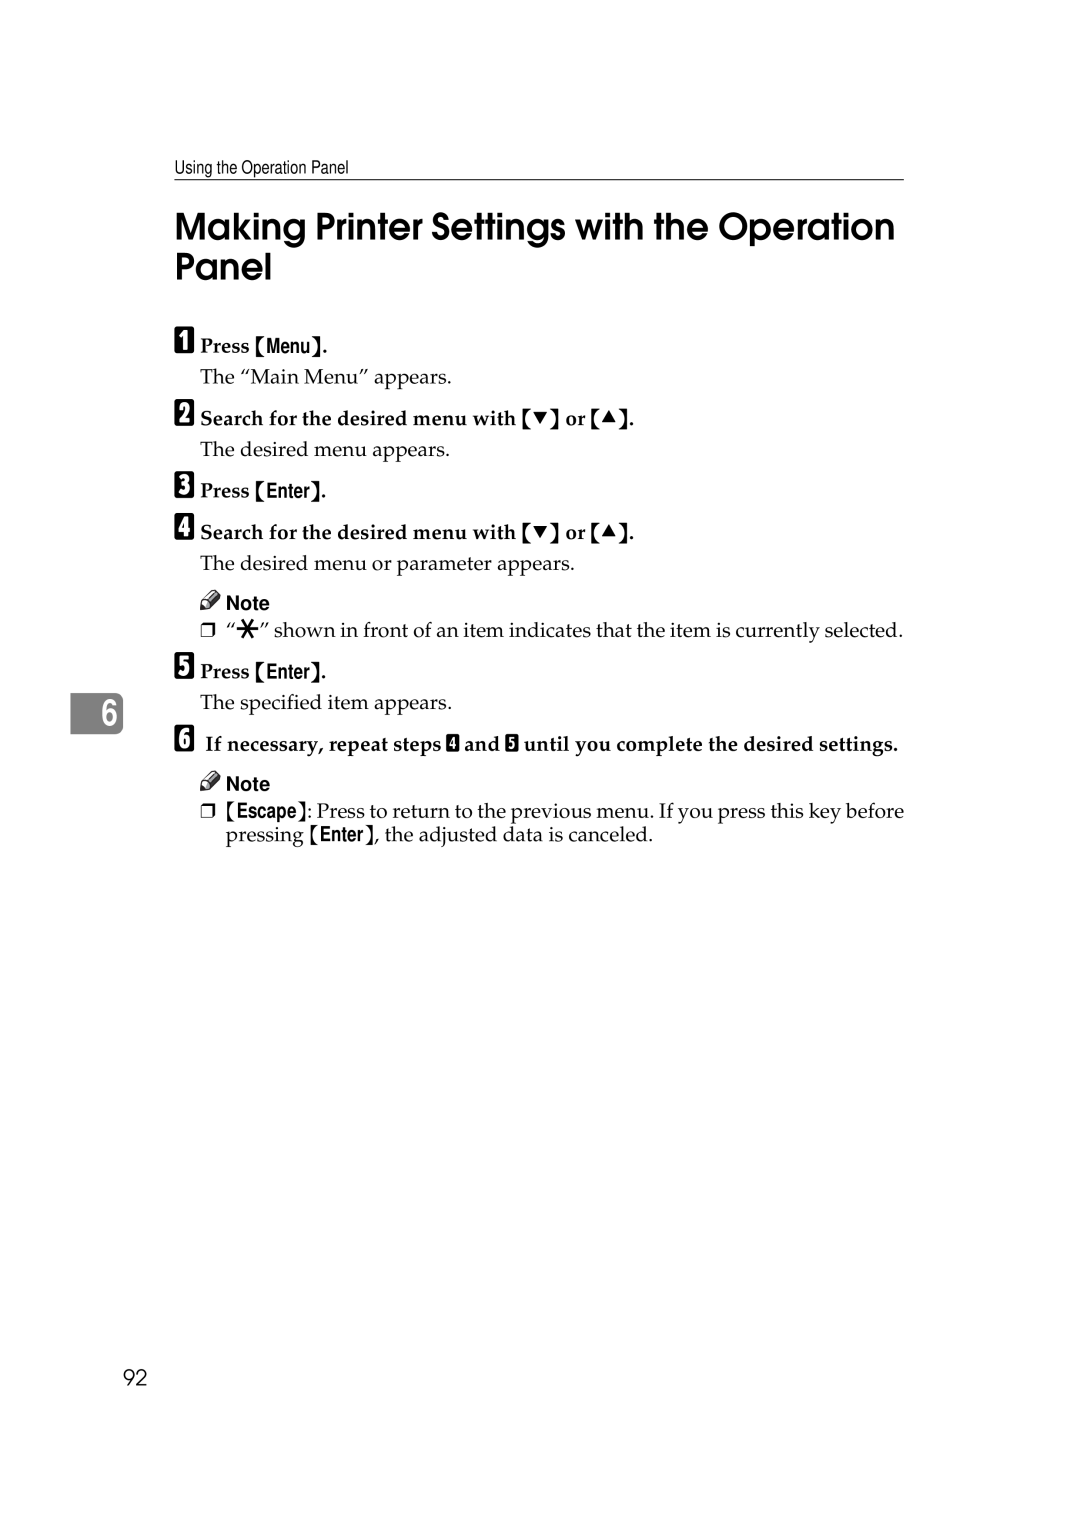 Ricoh Aficio AP2700 operating instructions Making Printer Settings with the Operation Panel 